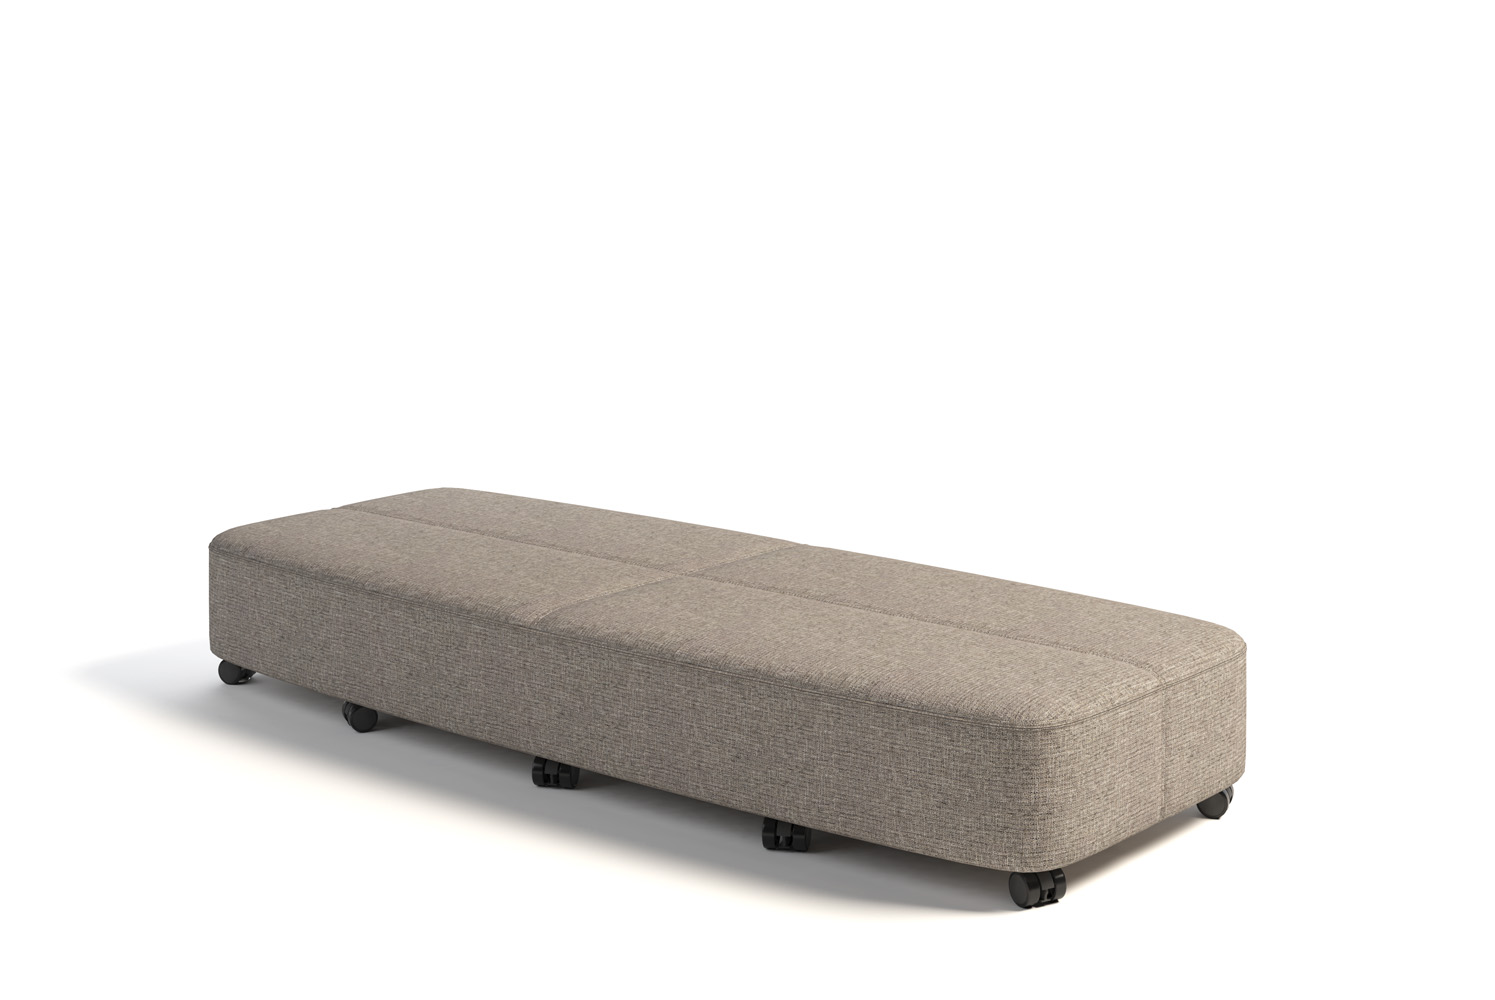 Mia 21x7 Almost Rectangle Ottoman with Casters